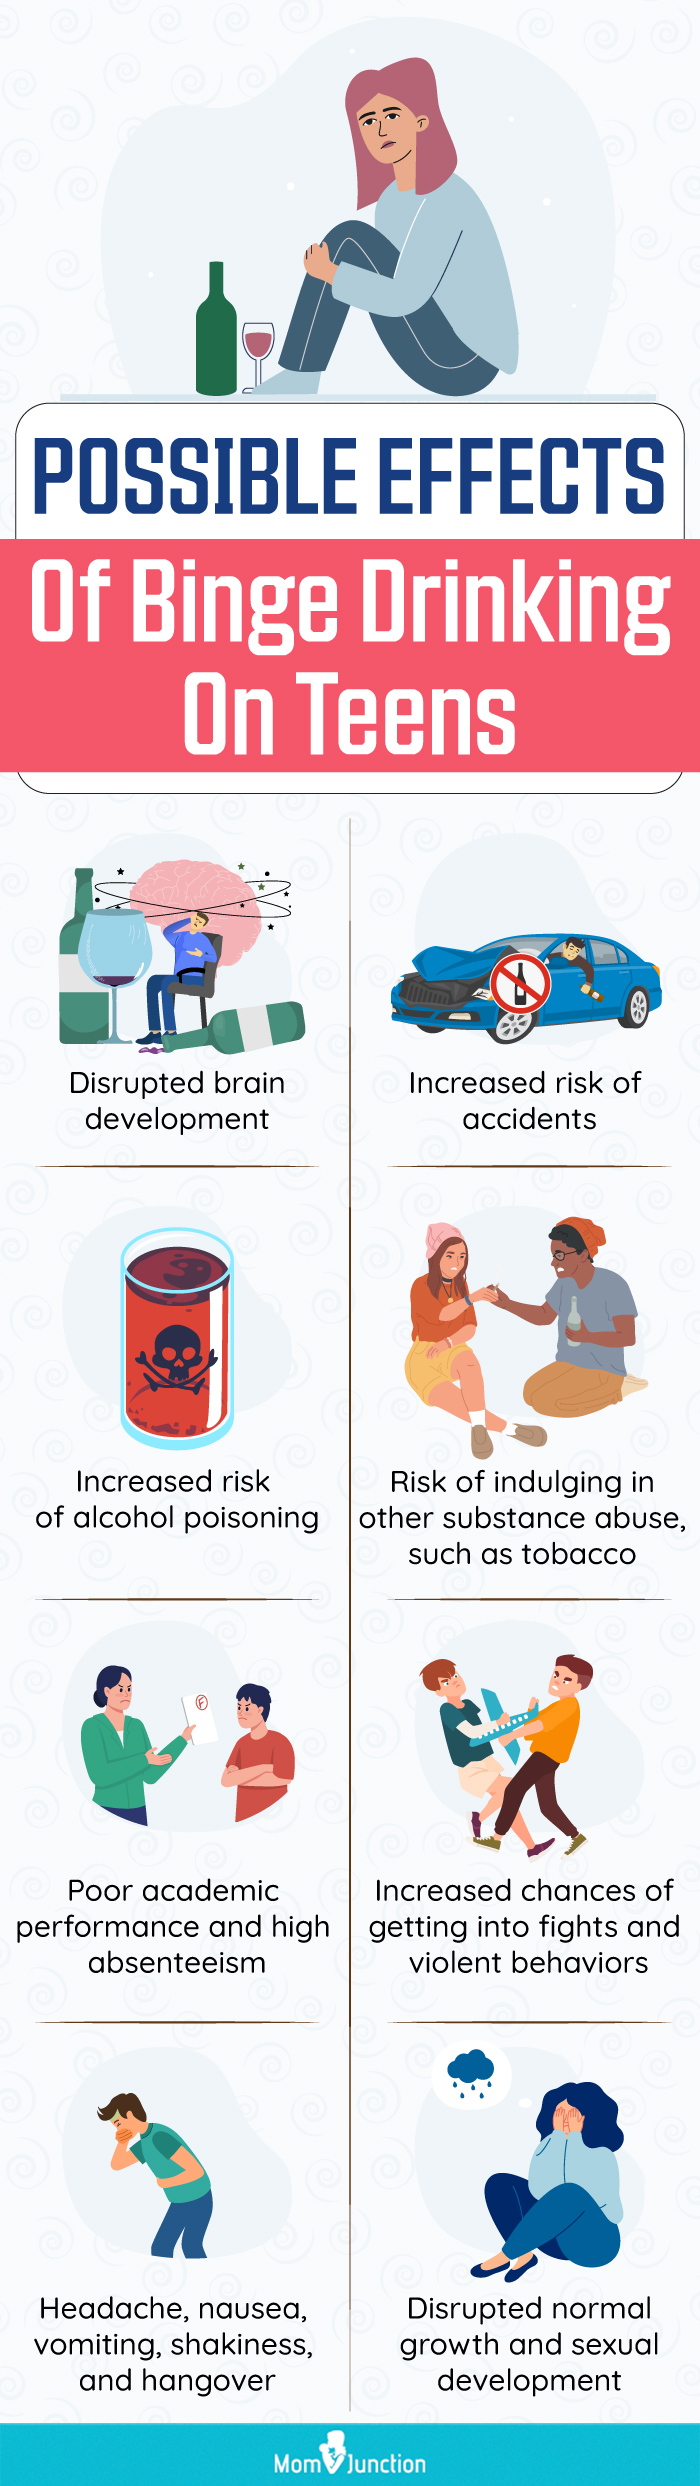 possible effects of binge drinking on teens (infographic)